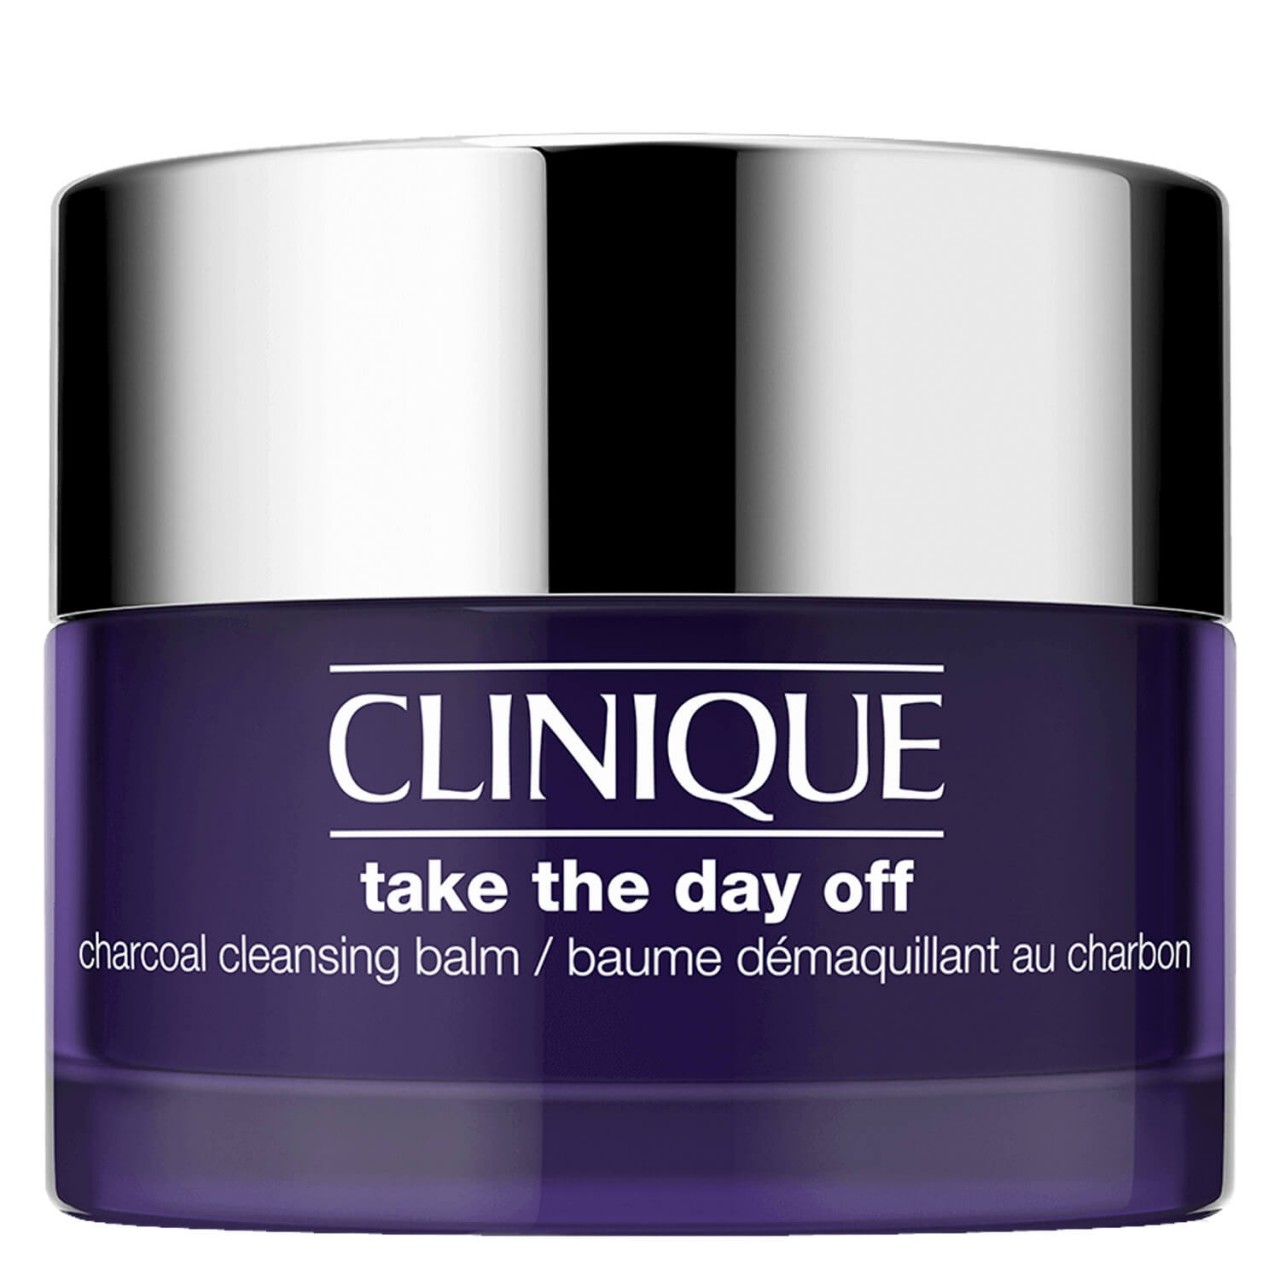 Demaquillants - Take The Day Off Charcoal Cleansing Balm von Clinique